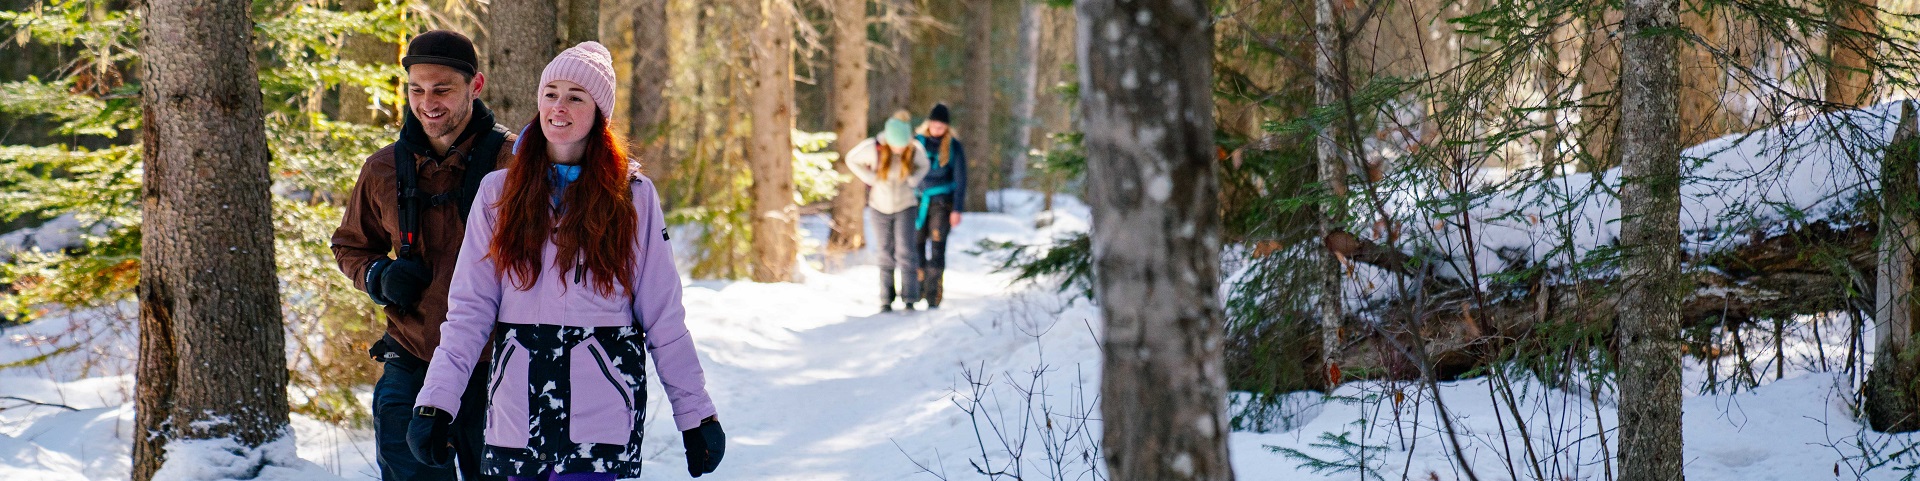 visitors walking in a snowy forest